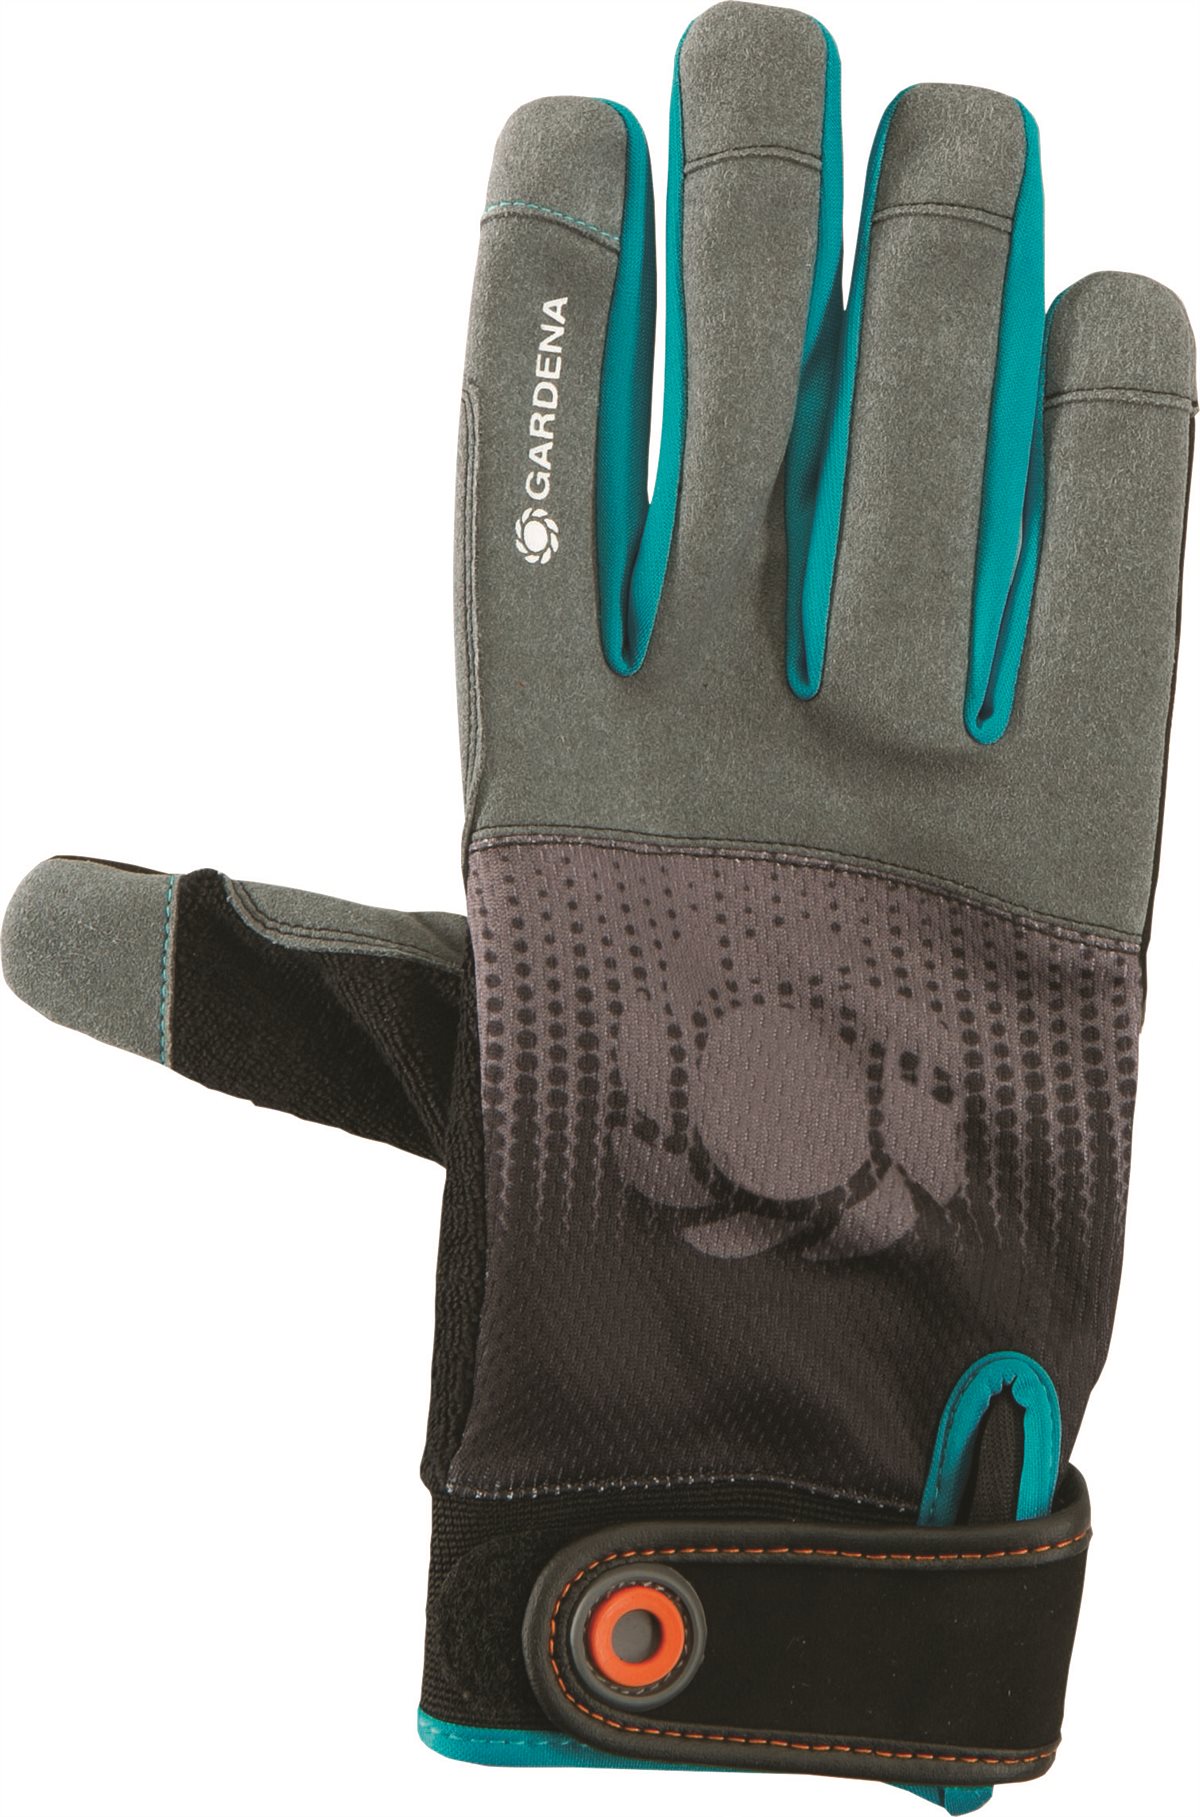 GARDENA Tool and Wood Gloves